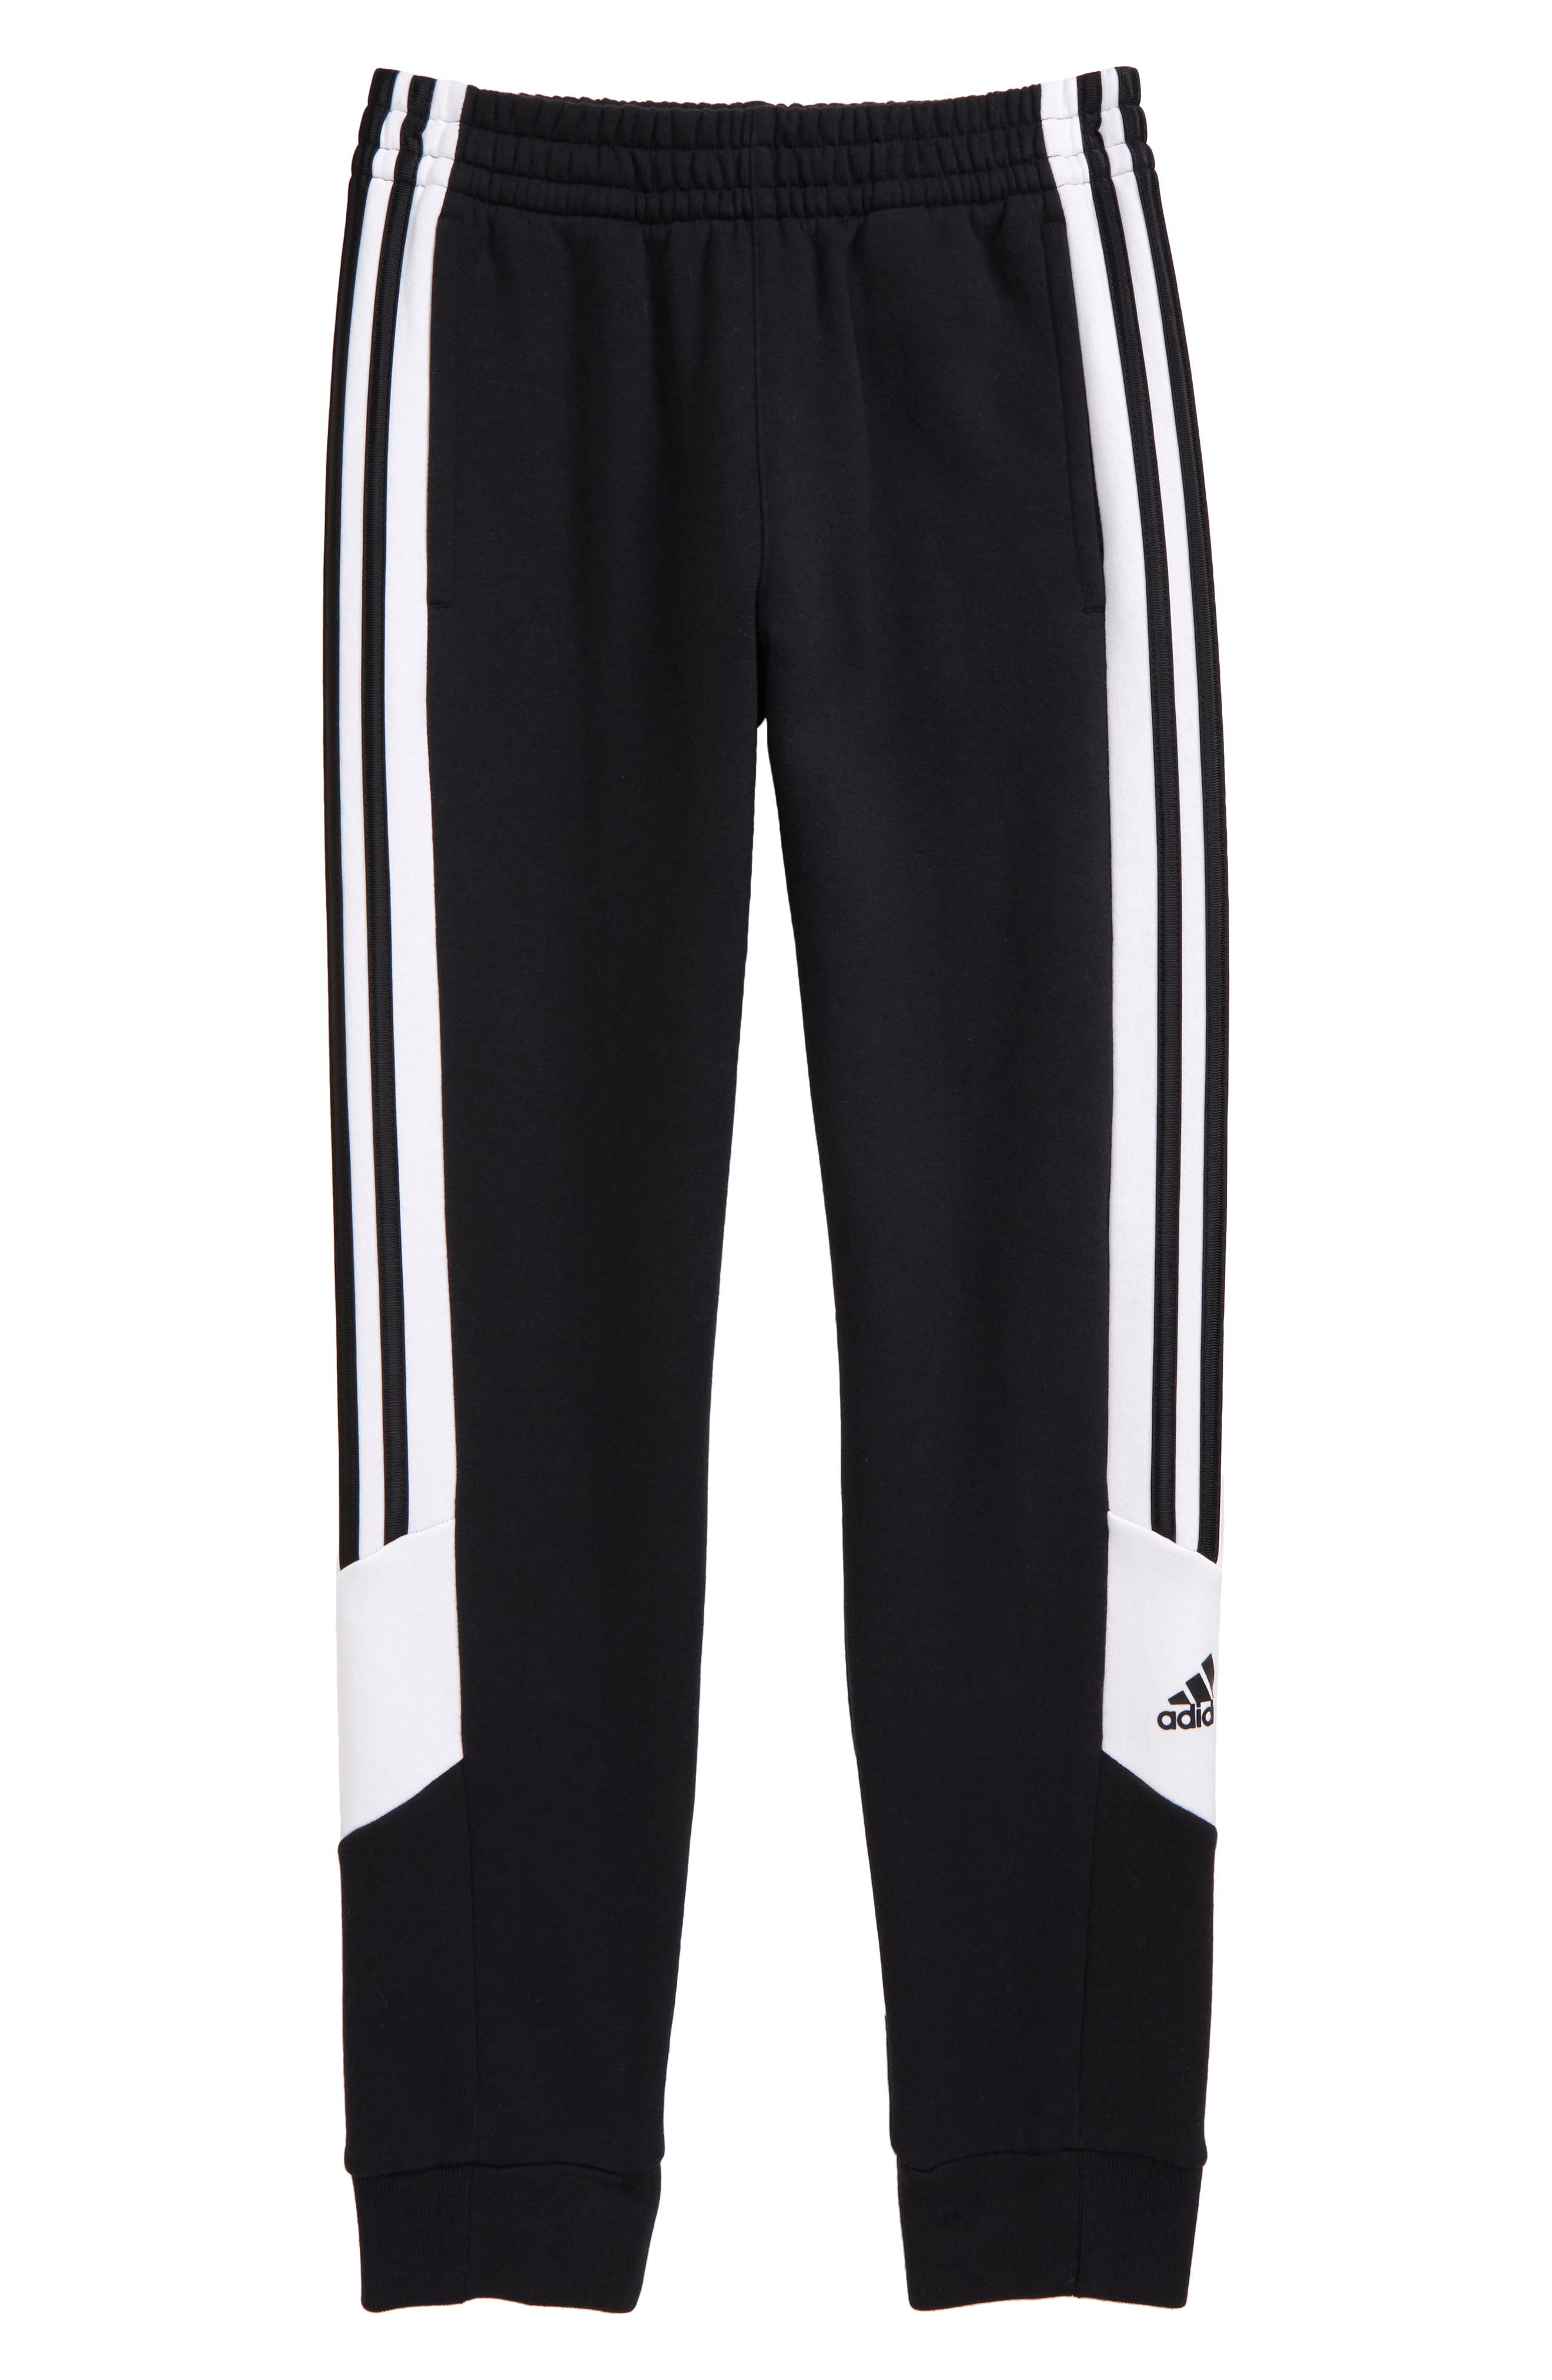 what to wear with adidas joggers guys